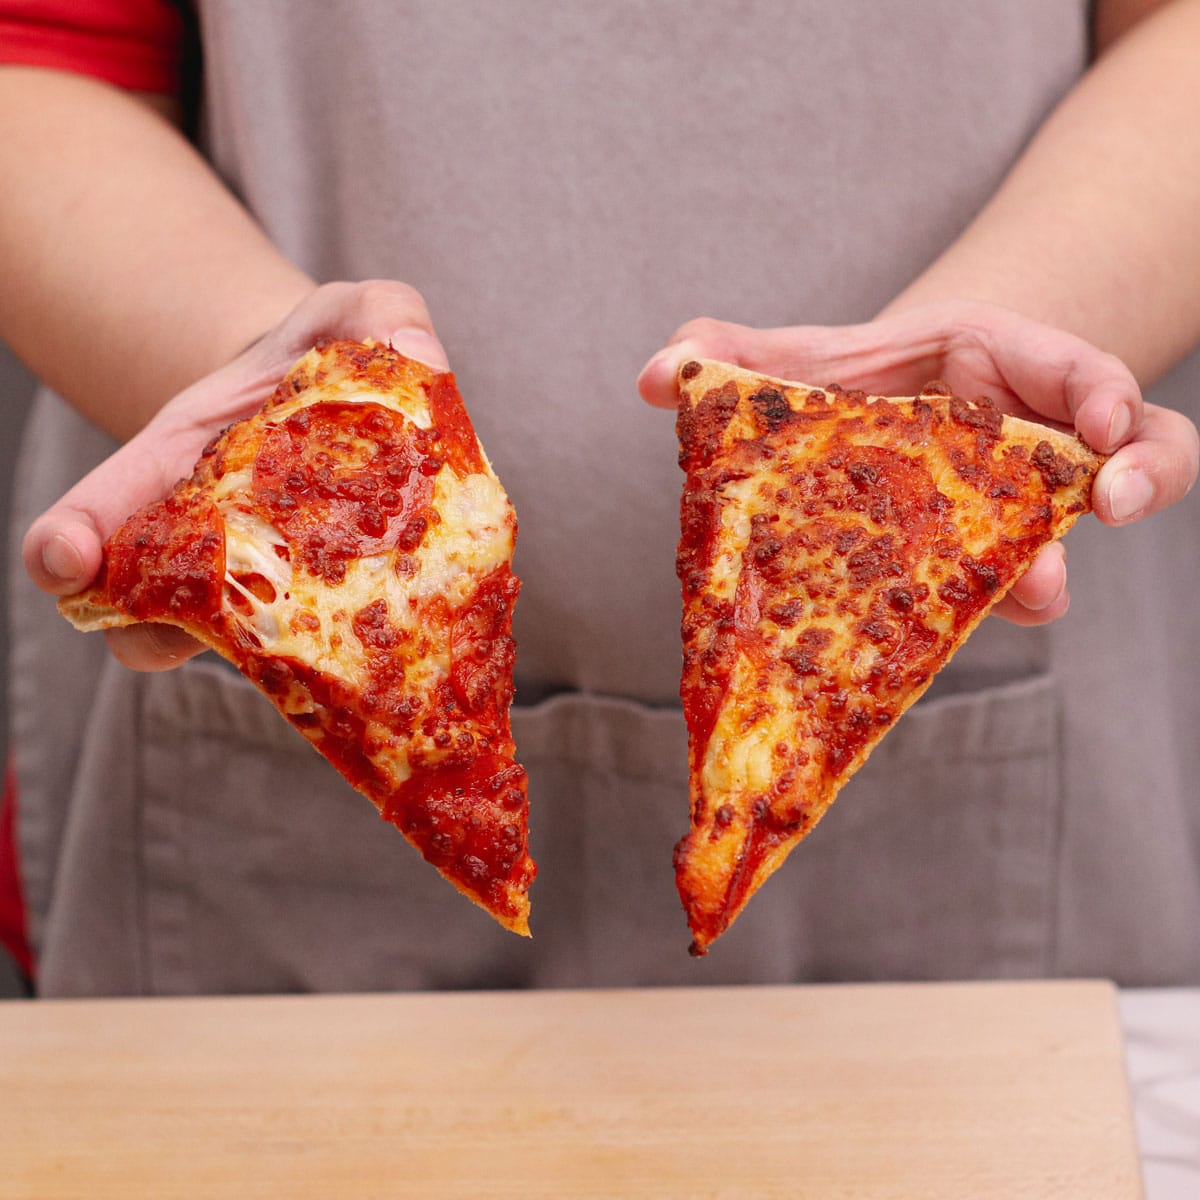 Air fried vs microwaved pizza slice, side by side comparison